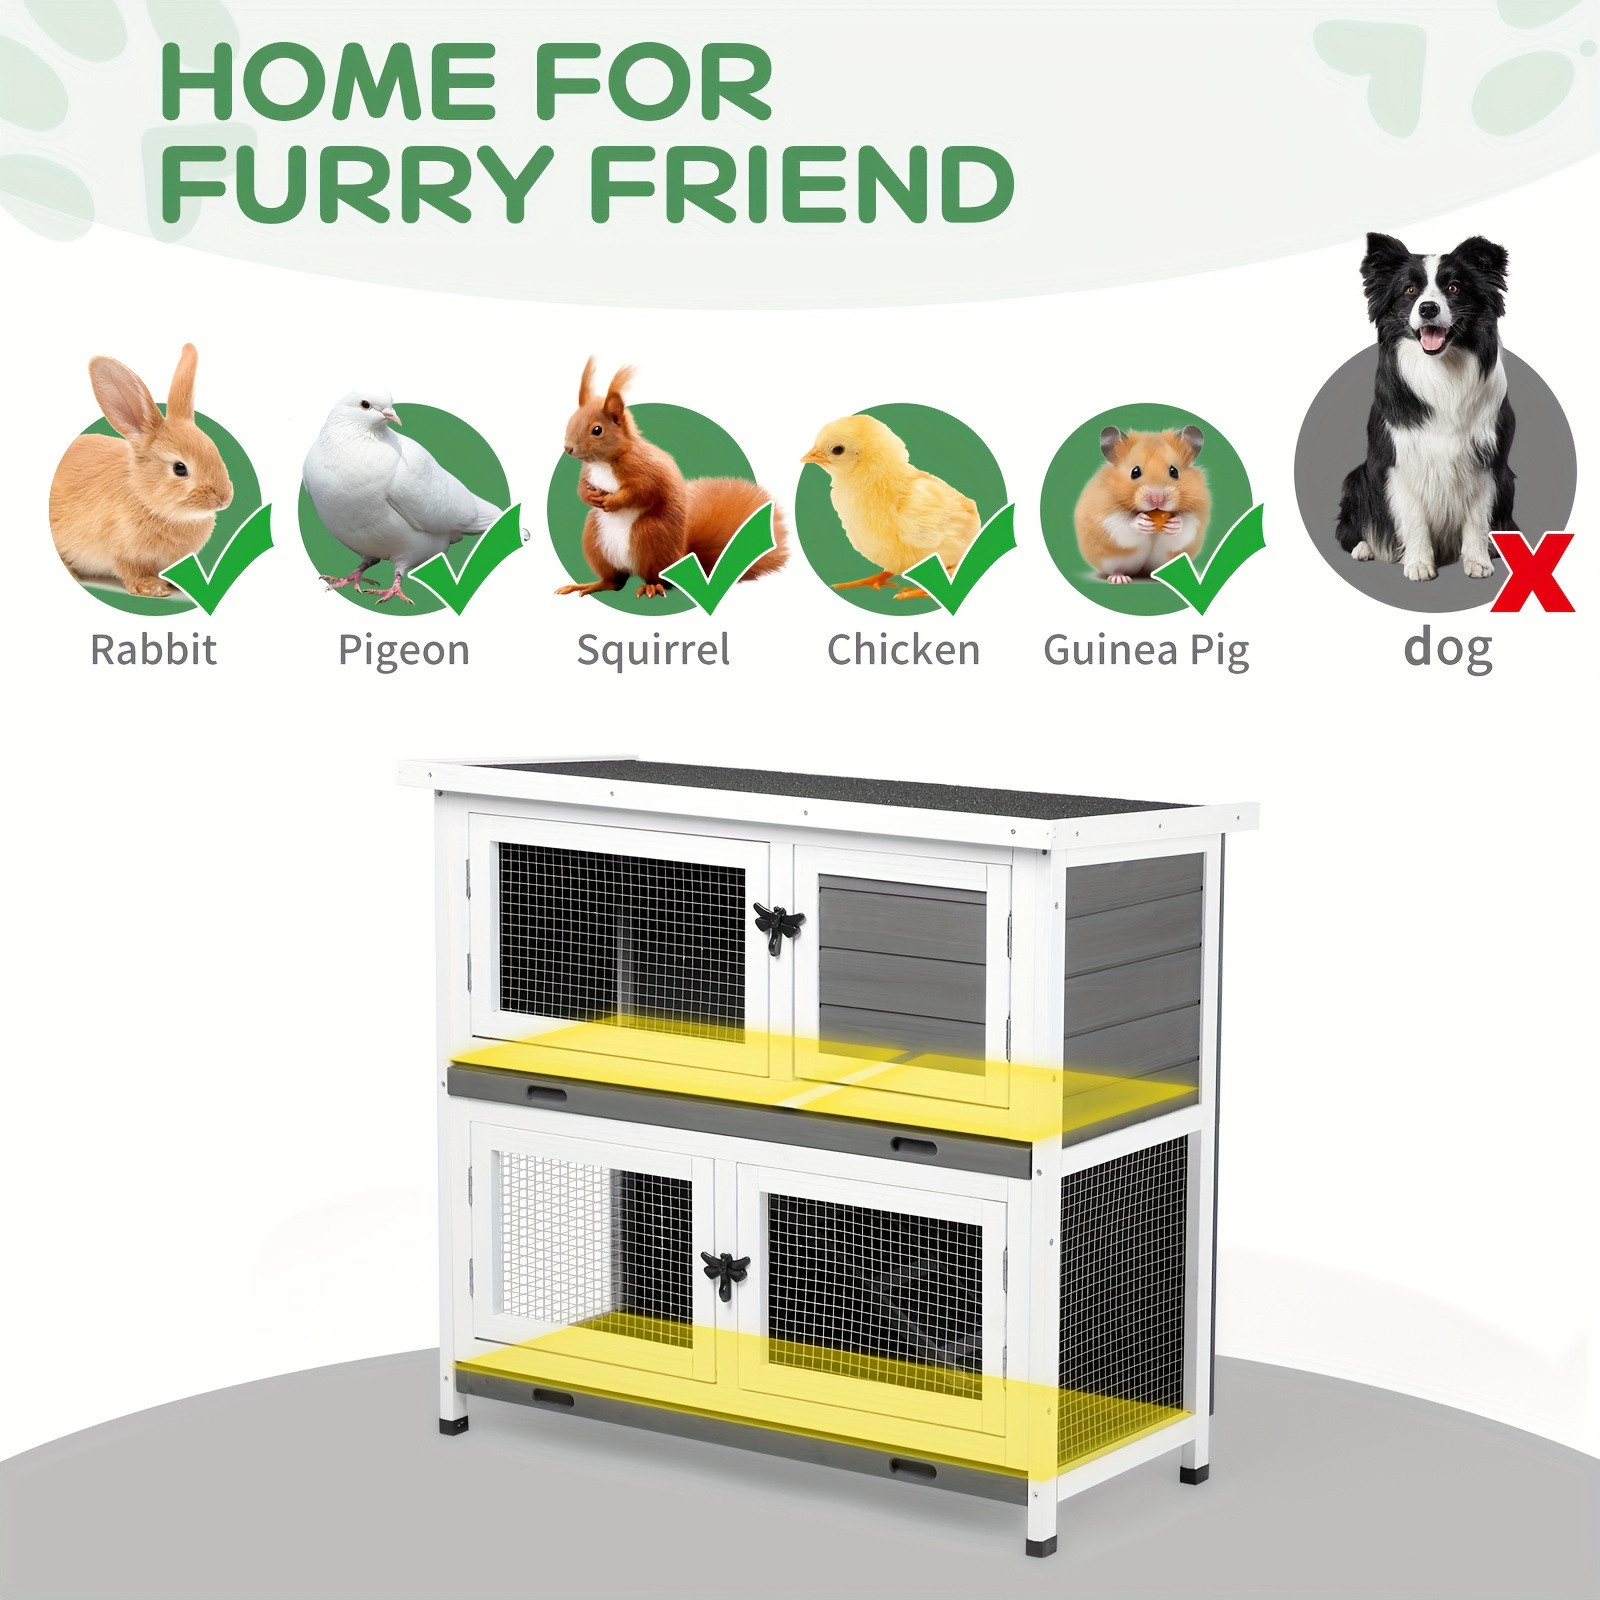 2 story solid wood rabbit hutch bunny cage with 2 large main rooms indoor outdoor rabbit house guinea pig cage pet house for small animals with 2 removable trays grey white